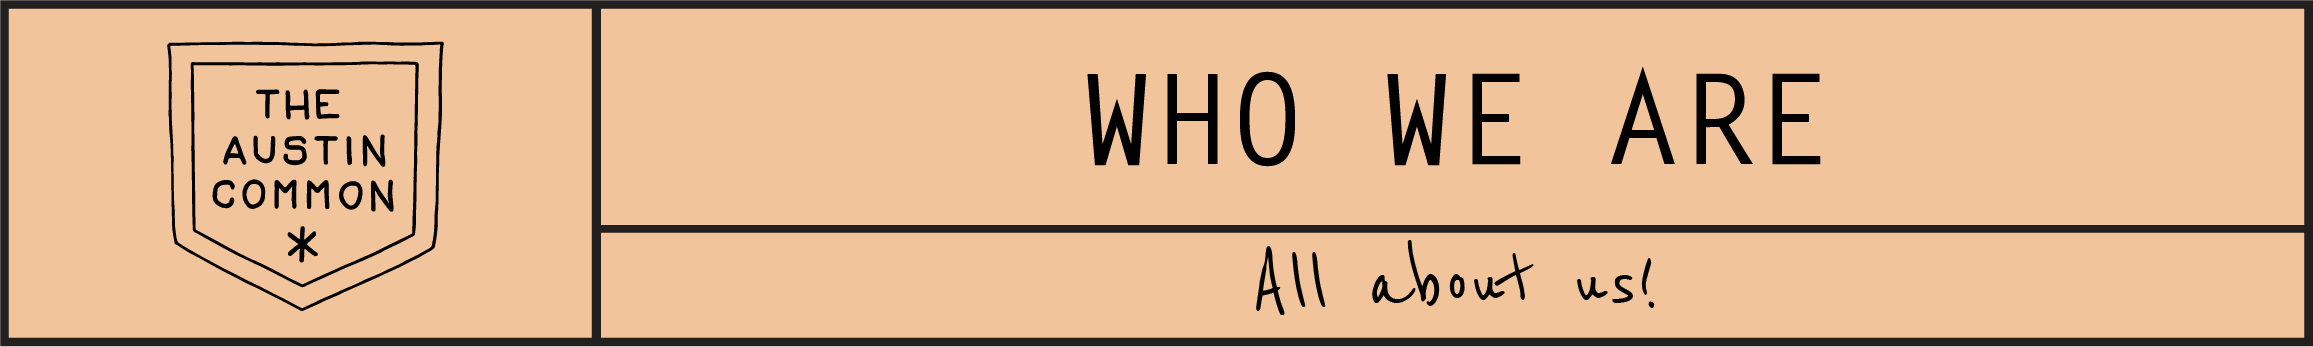 Who We Are - Header